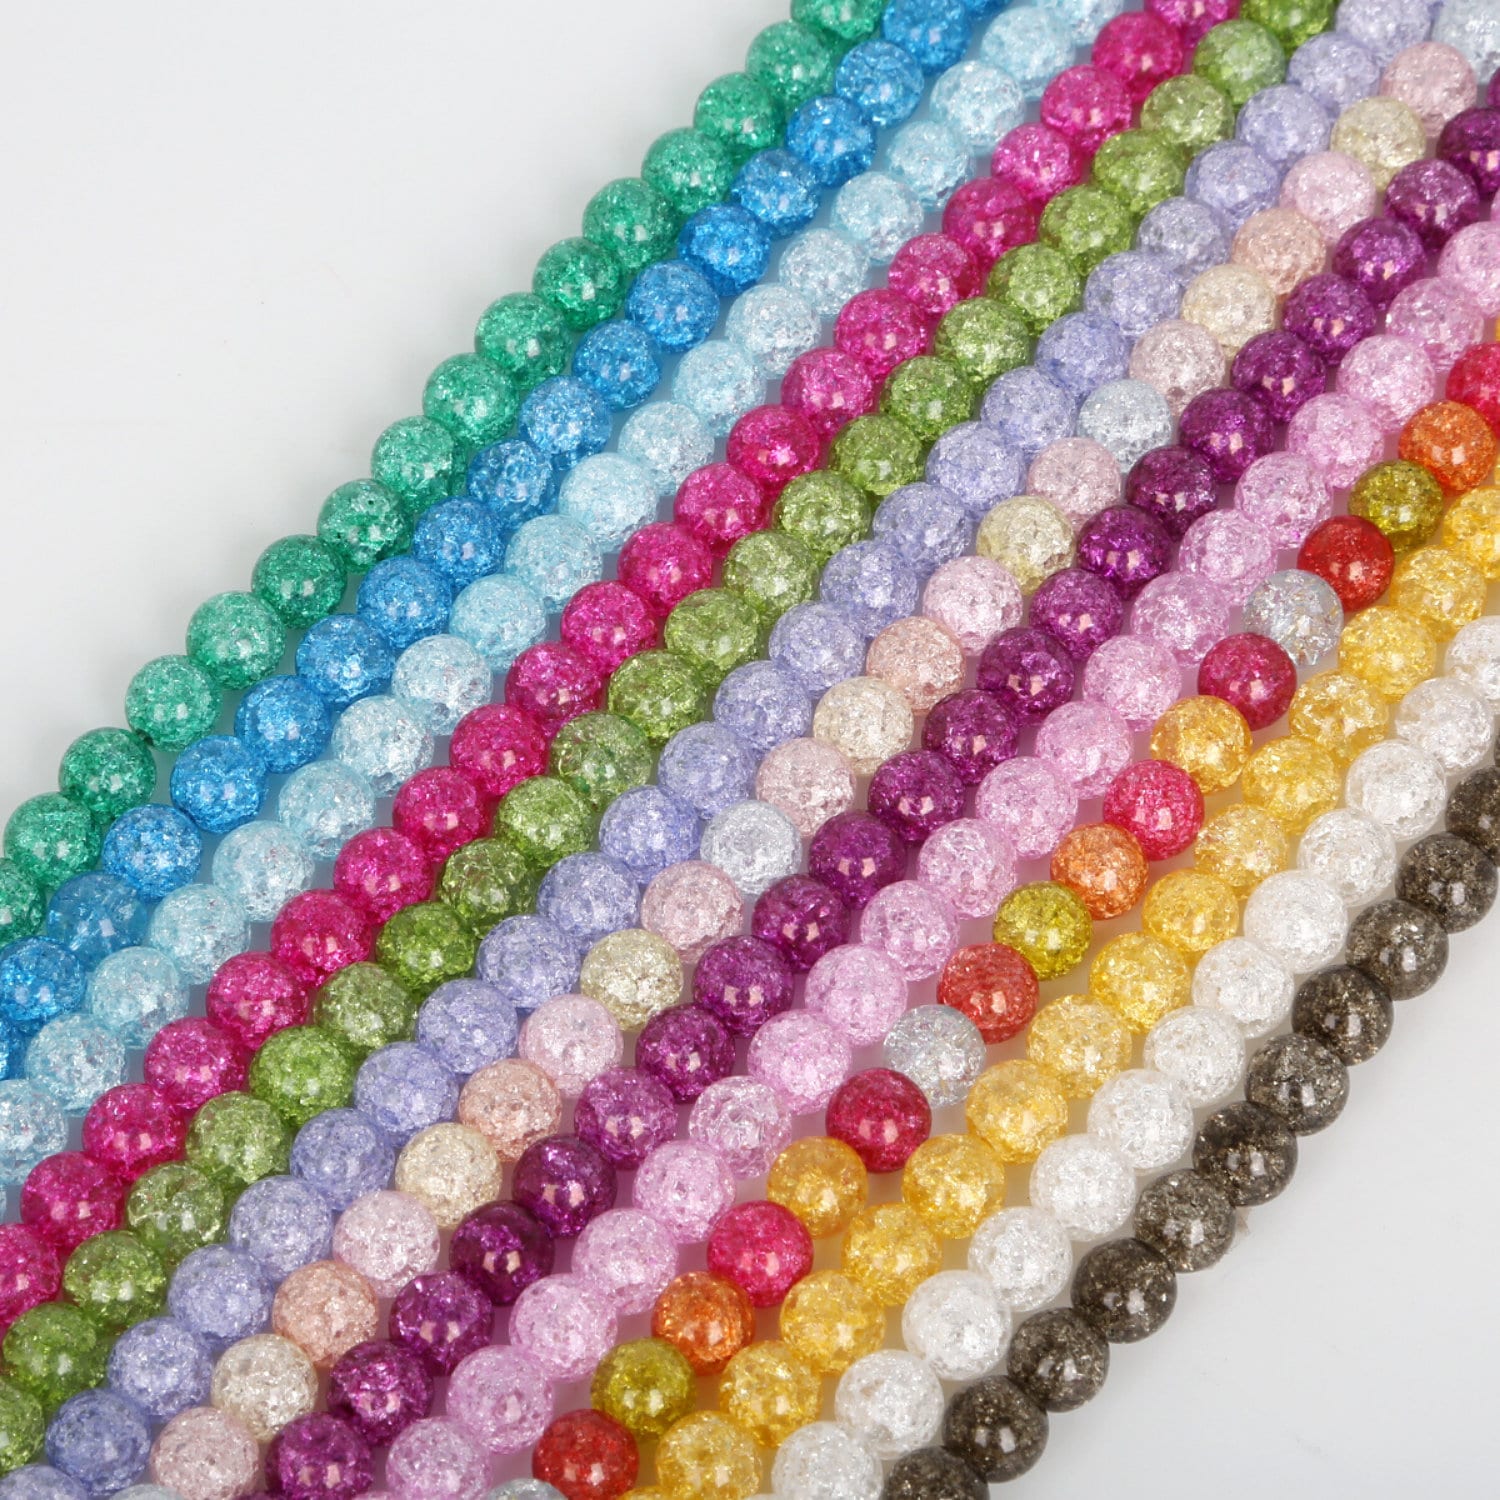 13 Colors of Crackle Beads 6mm 8mm 10mm 12mm Crystal - Etsy